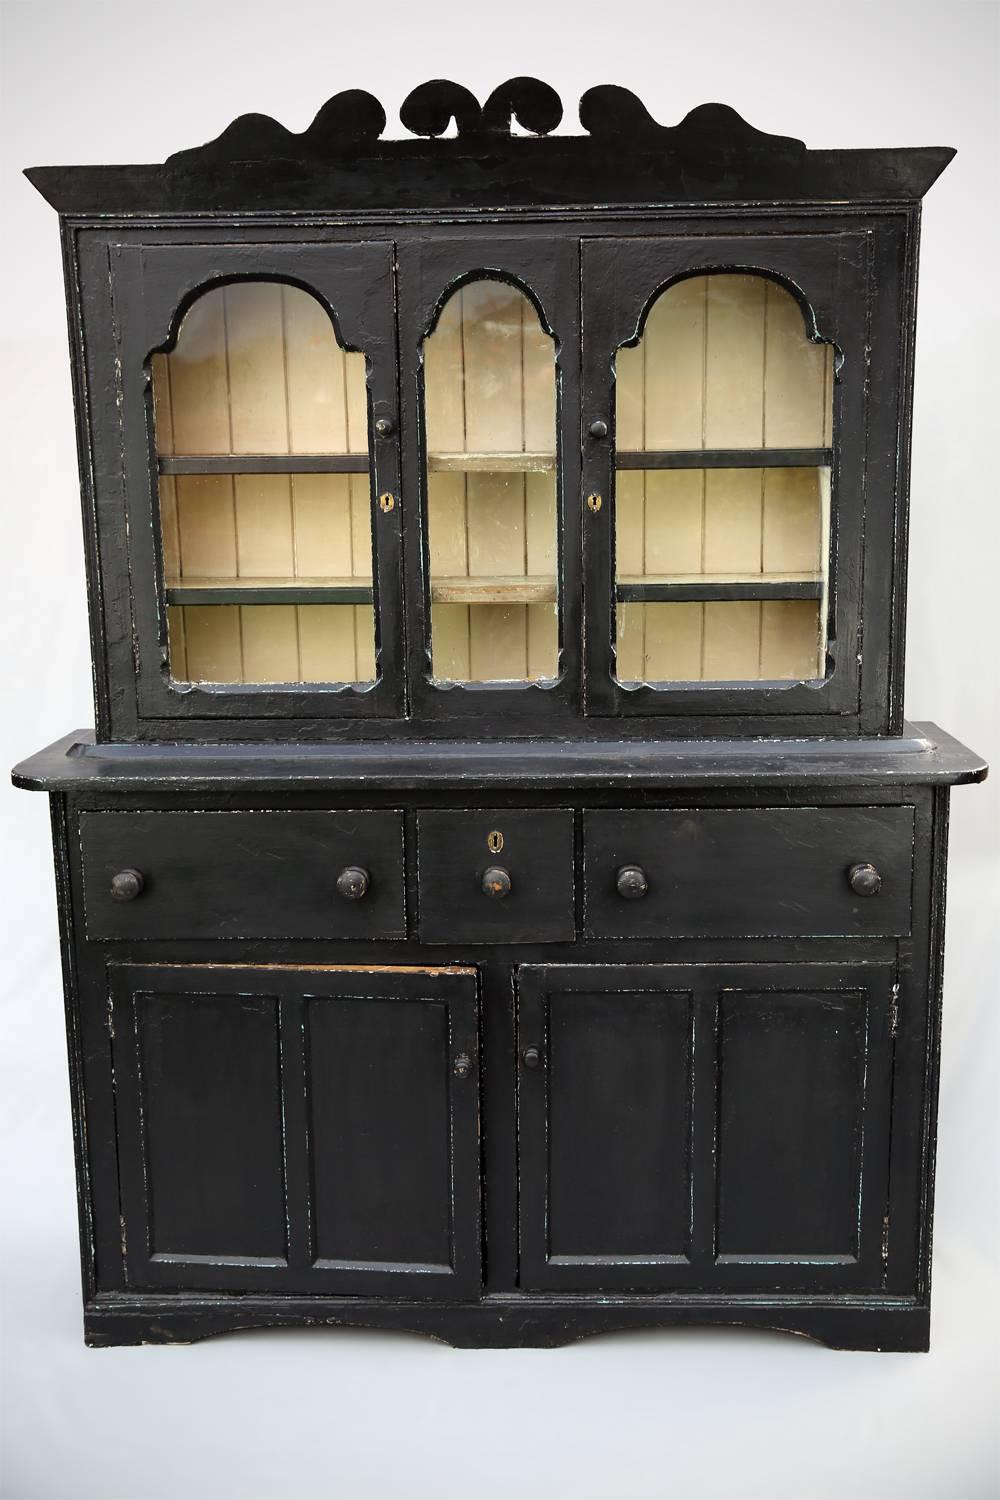 Dress Up: Rather lovely rustic Irish dresser or bookcase dating from the first part of the 19th century. With attractive arched and glazed windows and distinctive carved cornice, this useful piece has three deep, bun-handled drawers over a